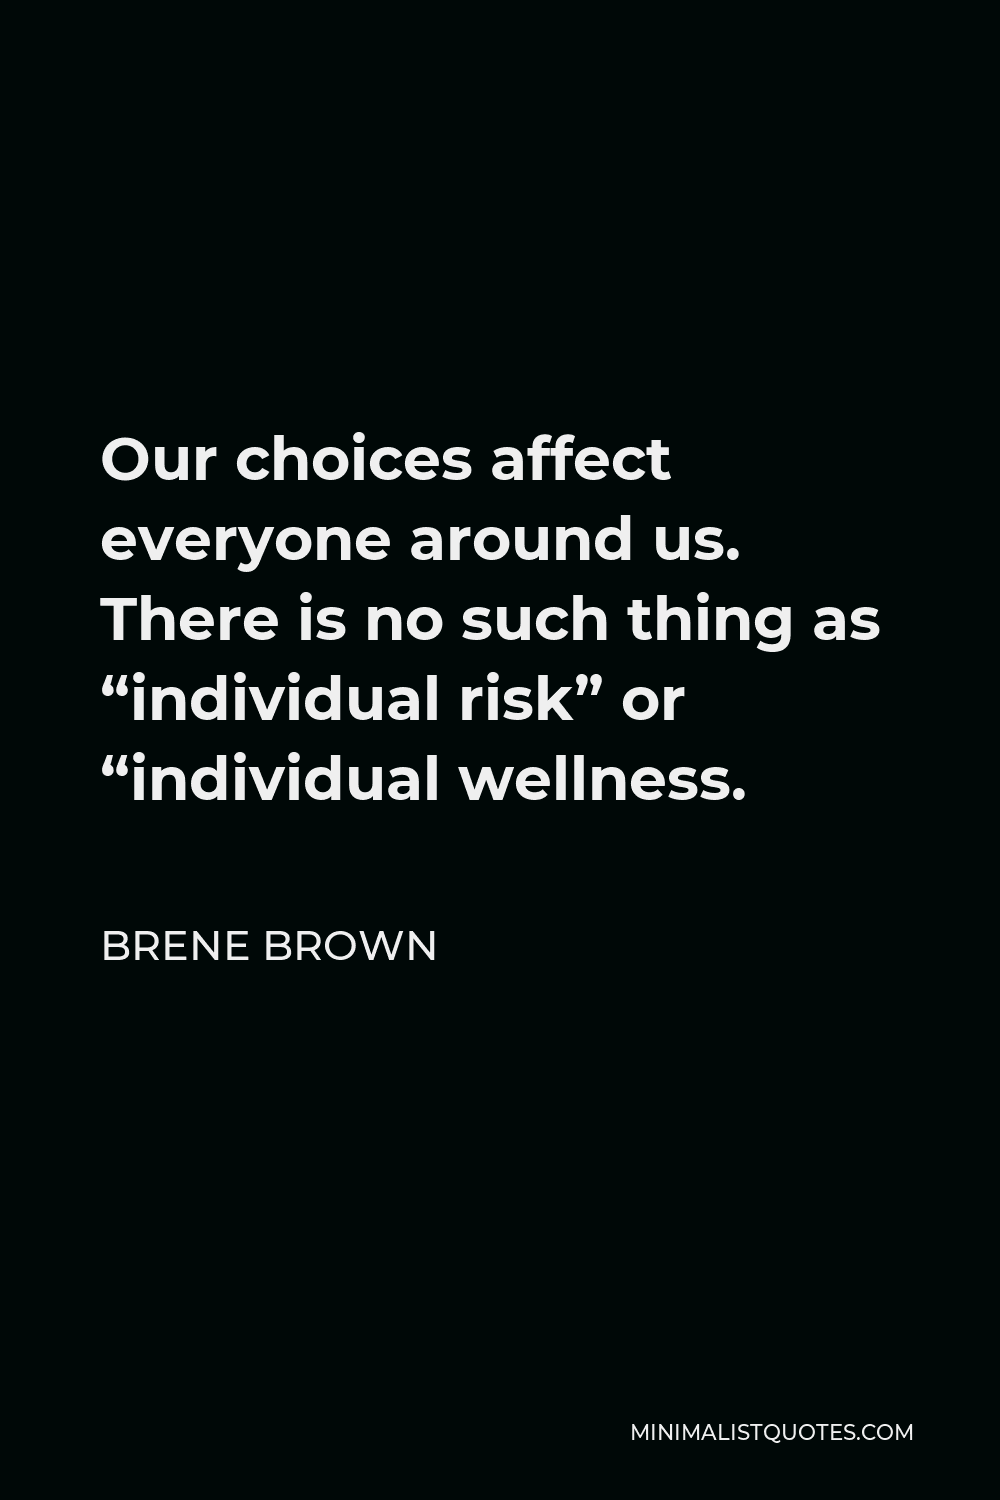 Brene Brown Quote - Our choices affect everyone around us. There is no such thing as “individual risk” or “individual wellness.